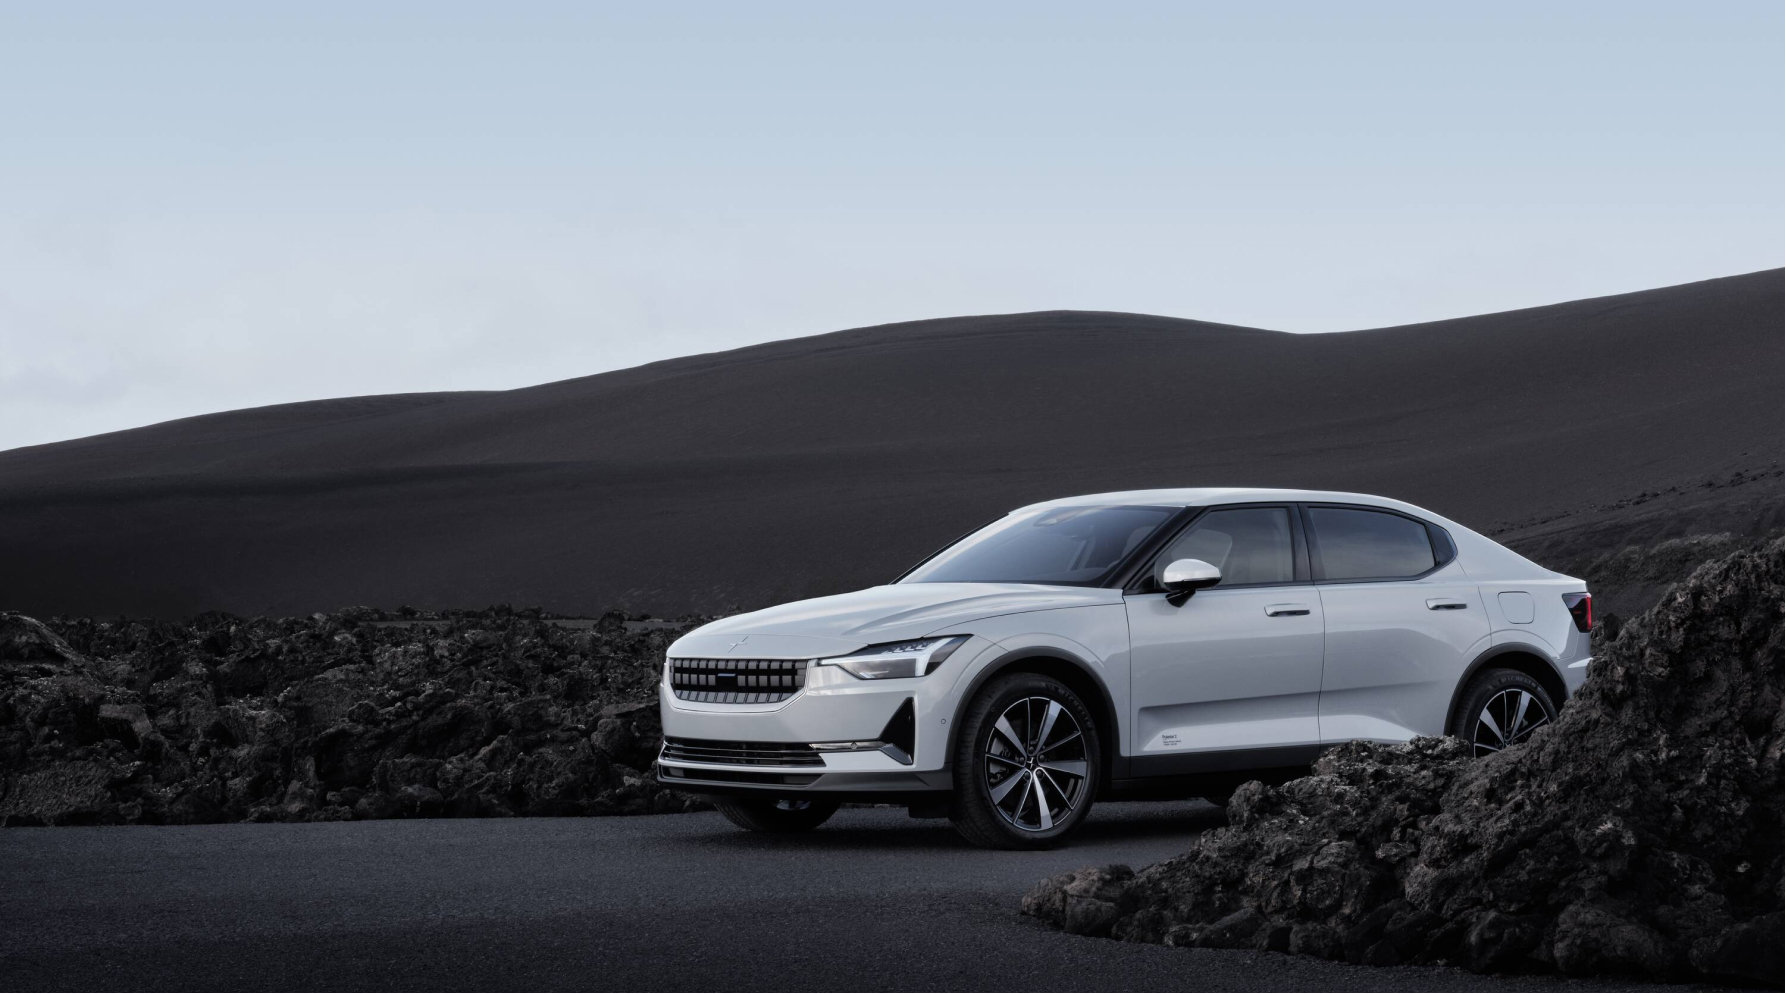 Polestar 2 driving in a hilly landscape.